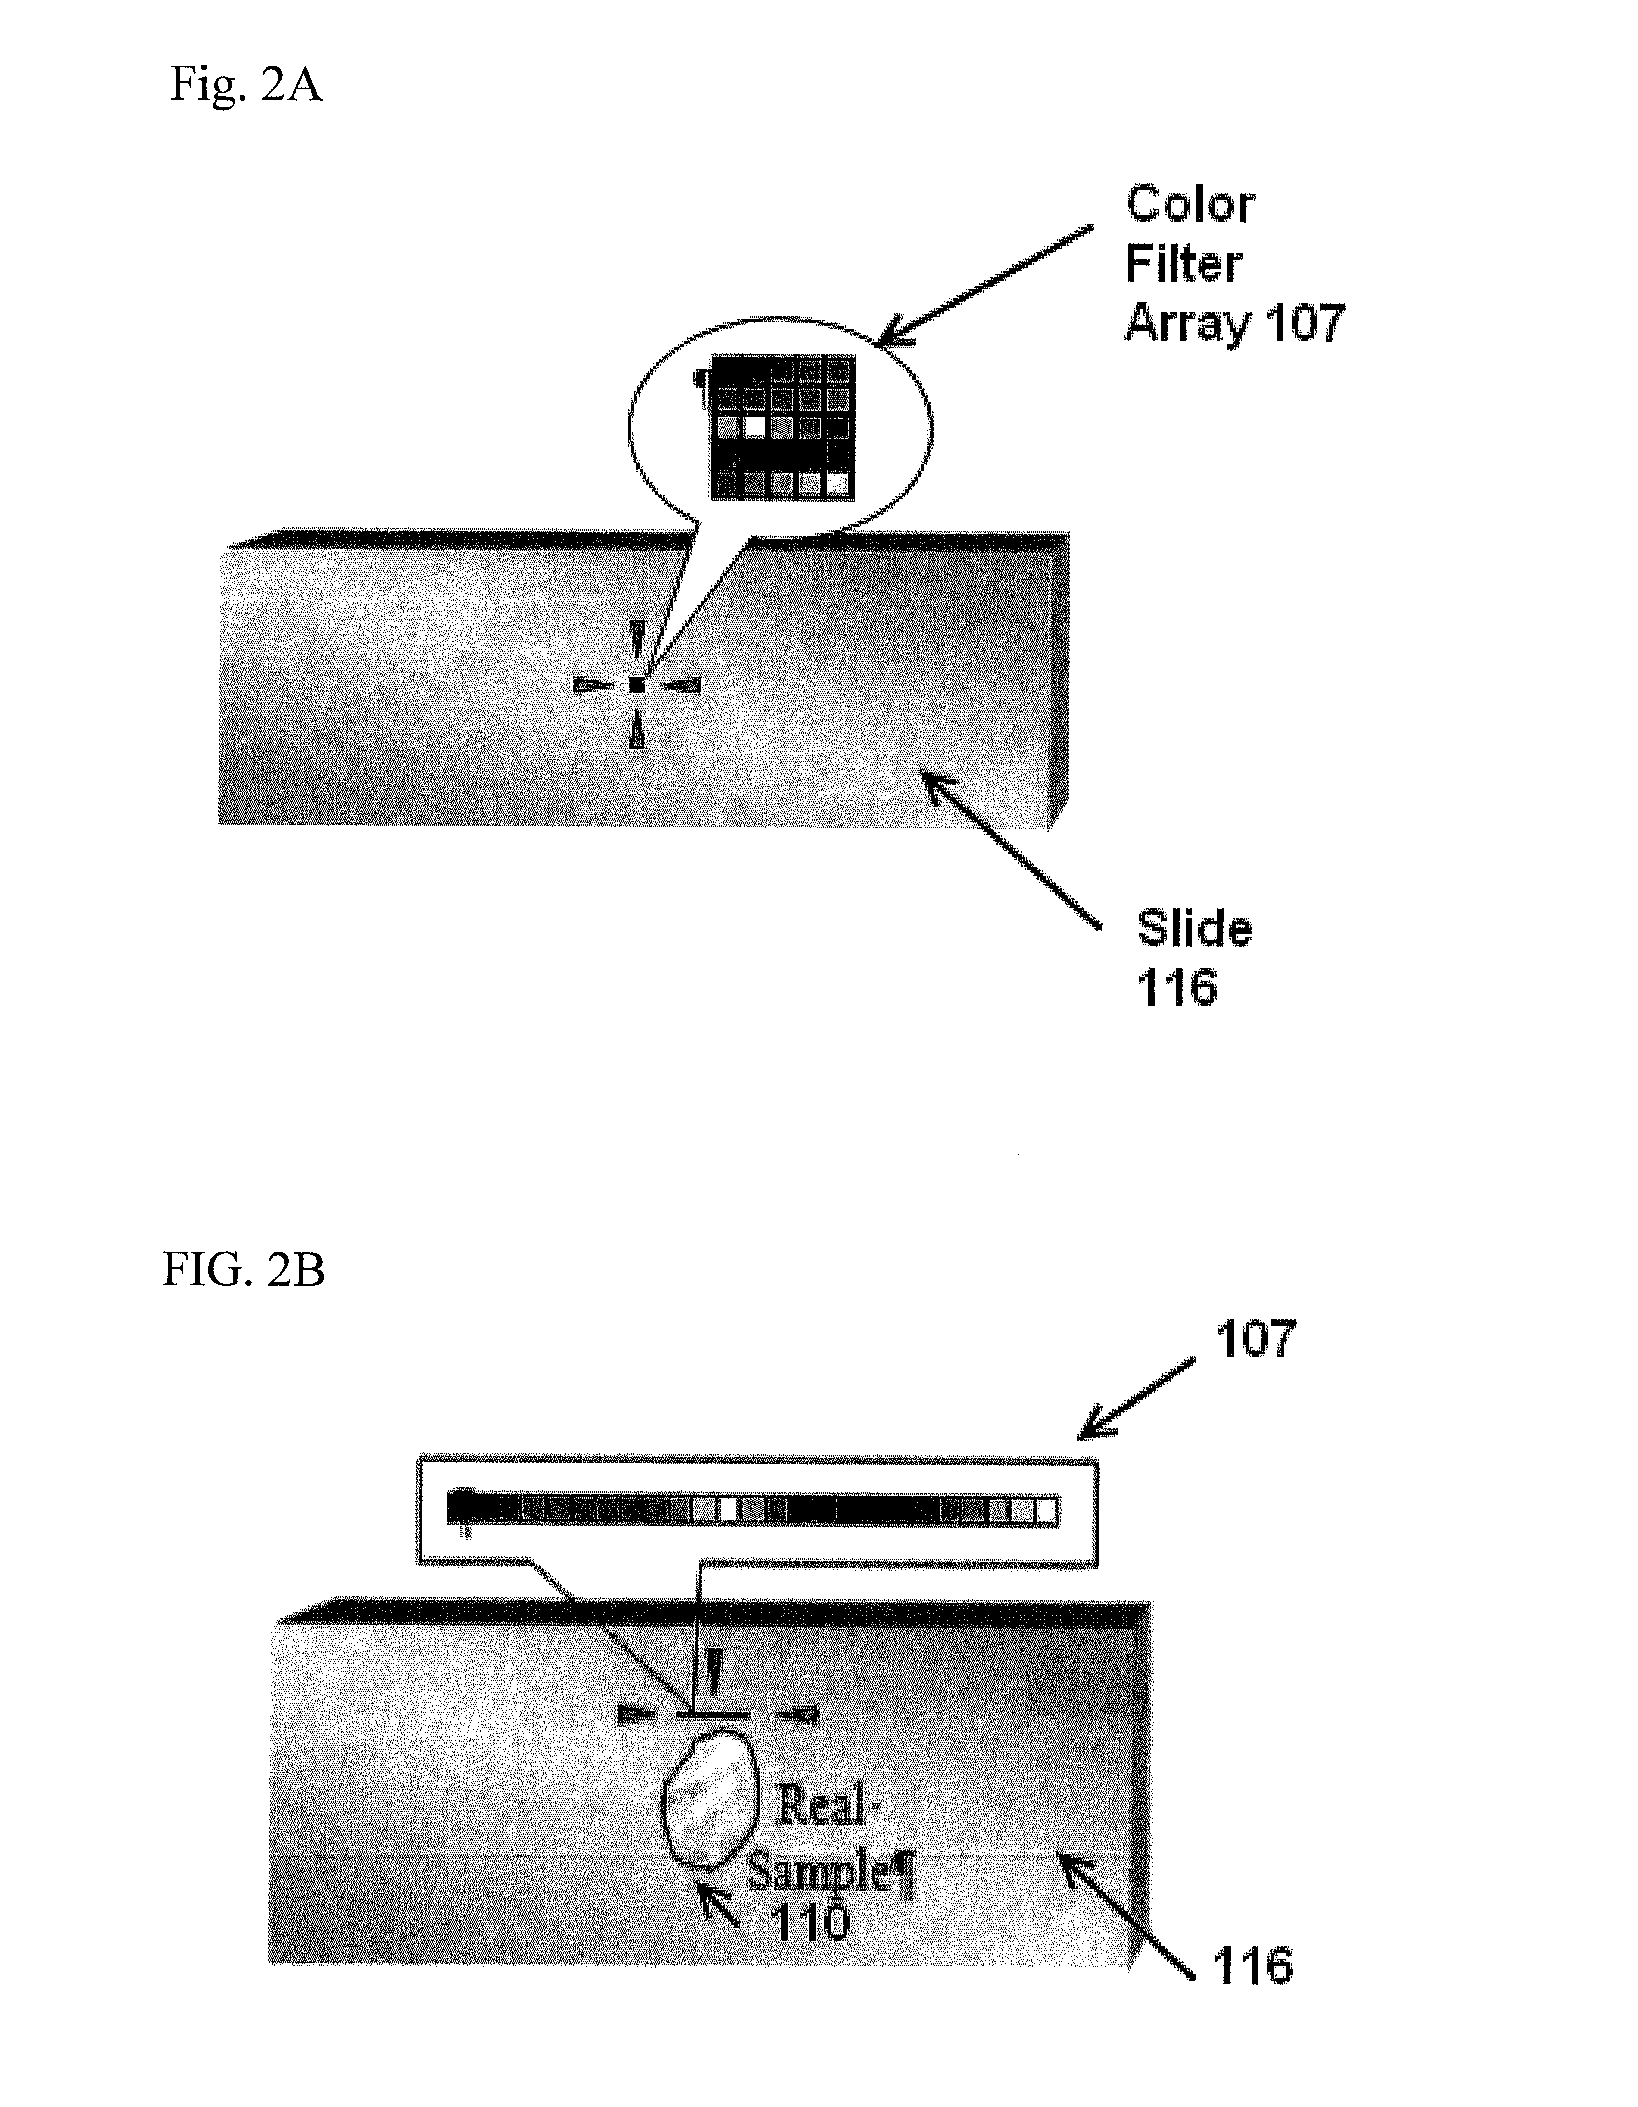 System and apparatus for color correction in transmission-microscope slides